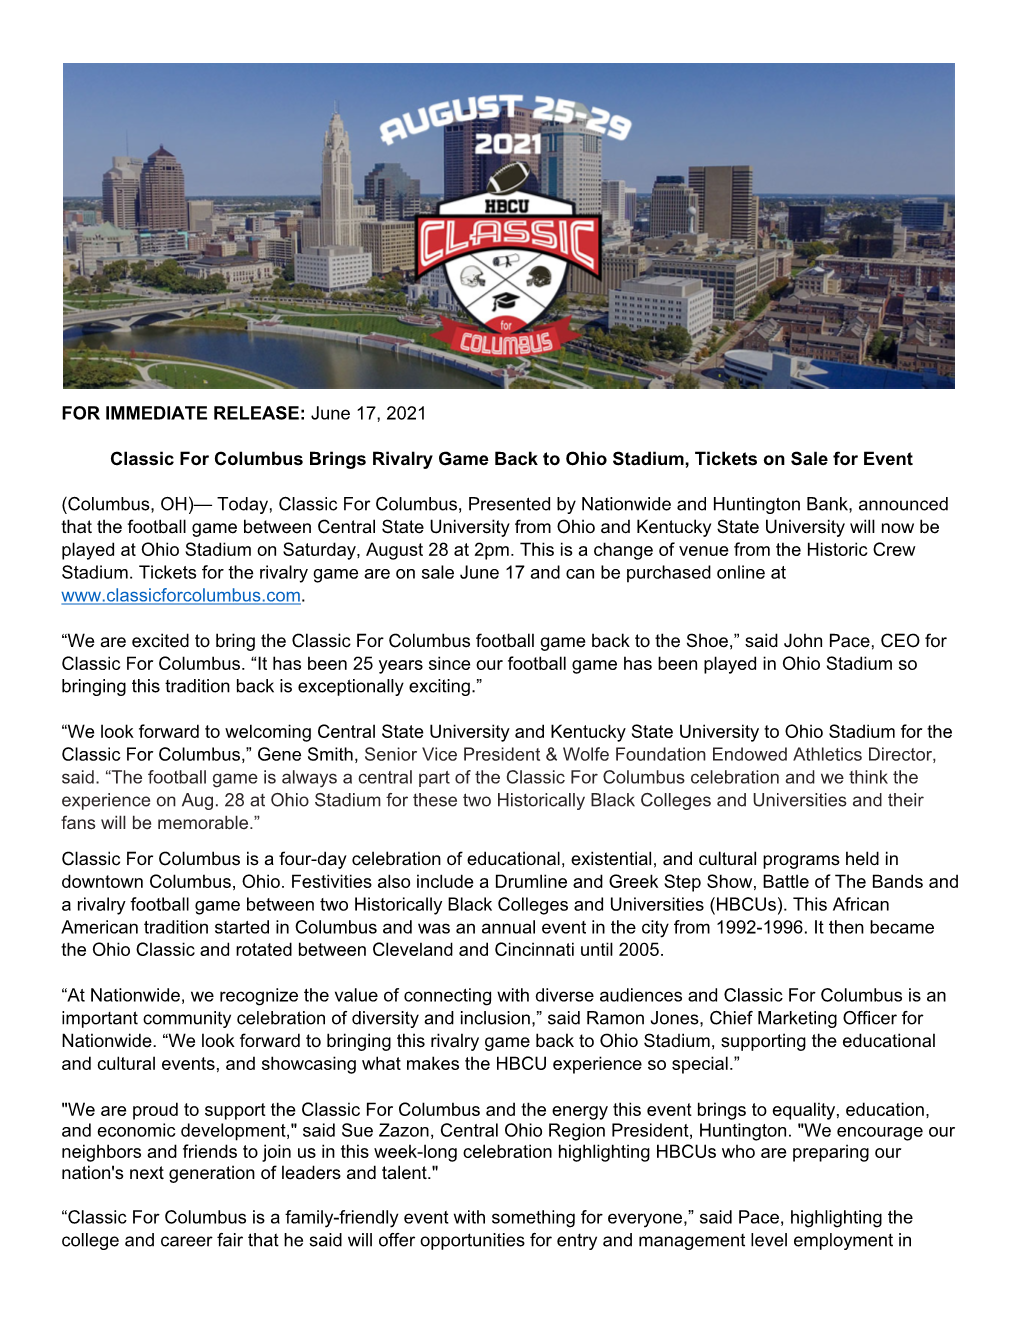 FOR IMMEDIATE RELEASE: June 17, 2021 Classic for Columbus Brings